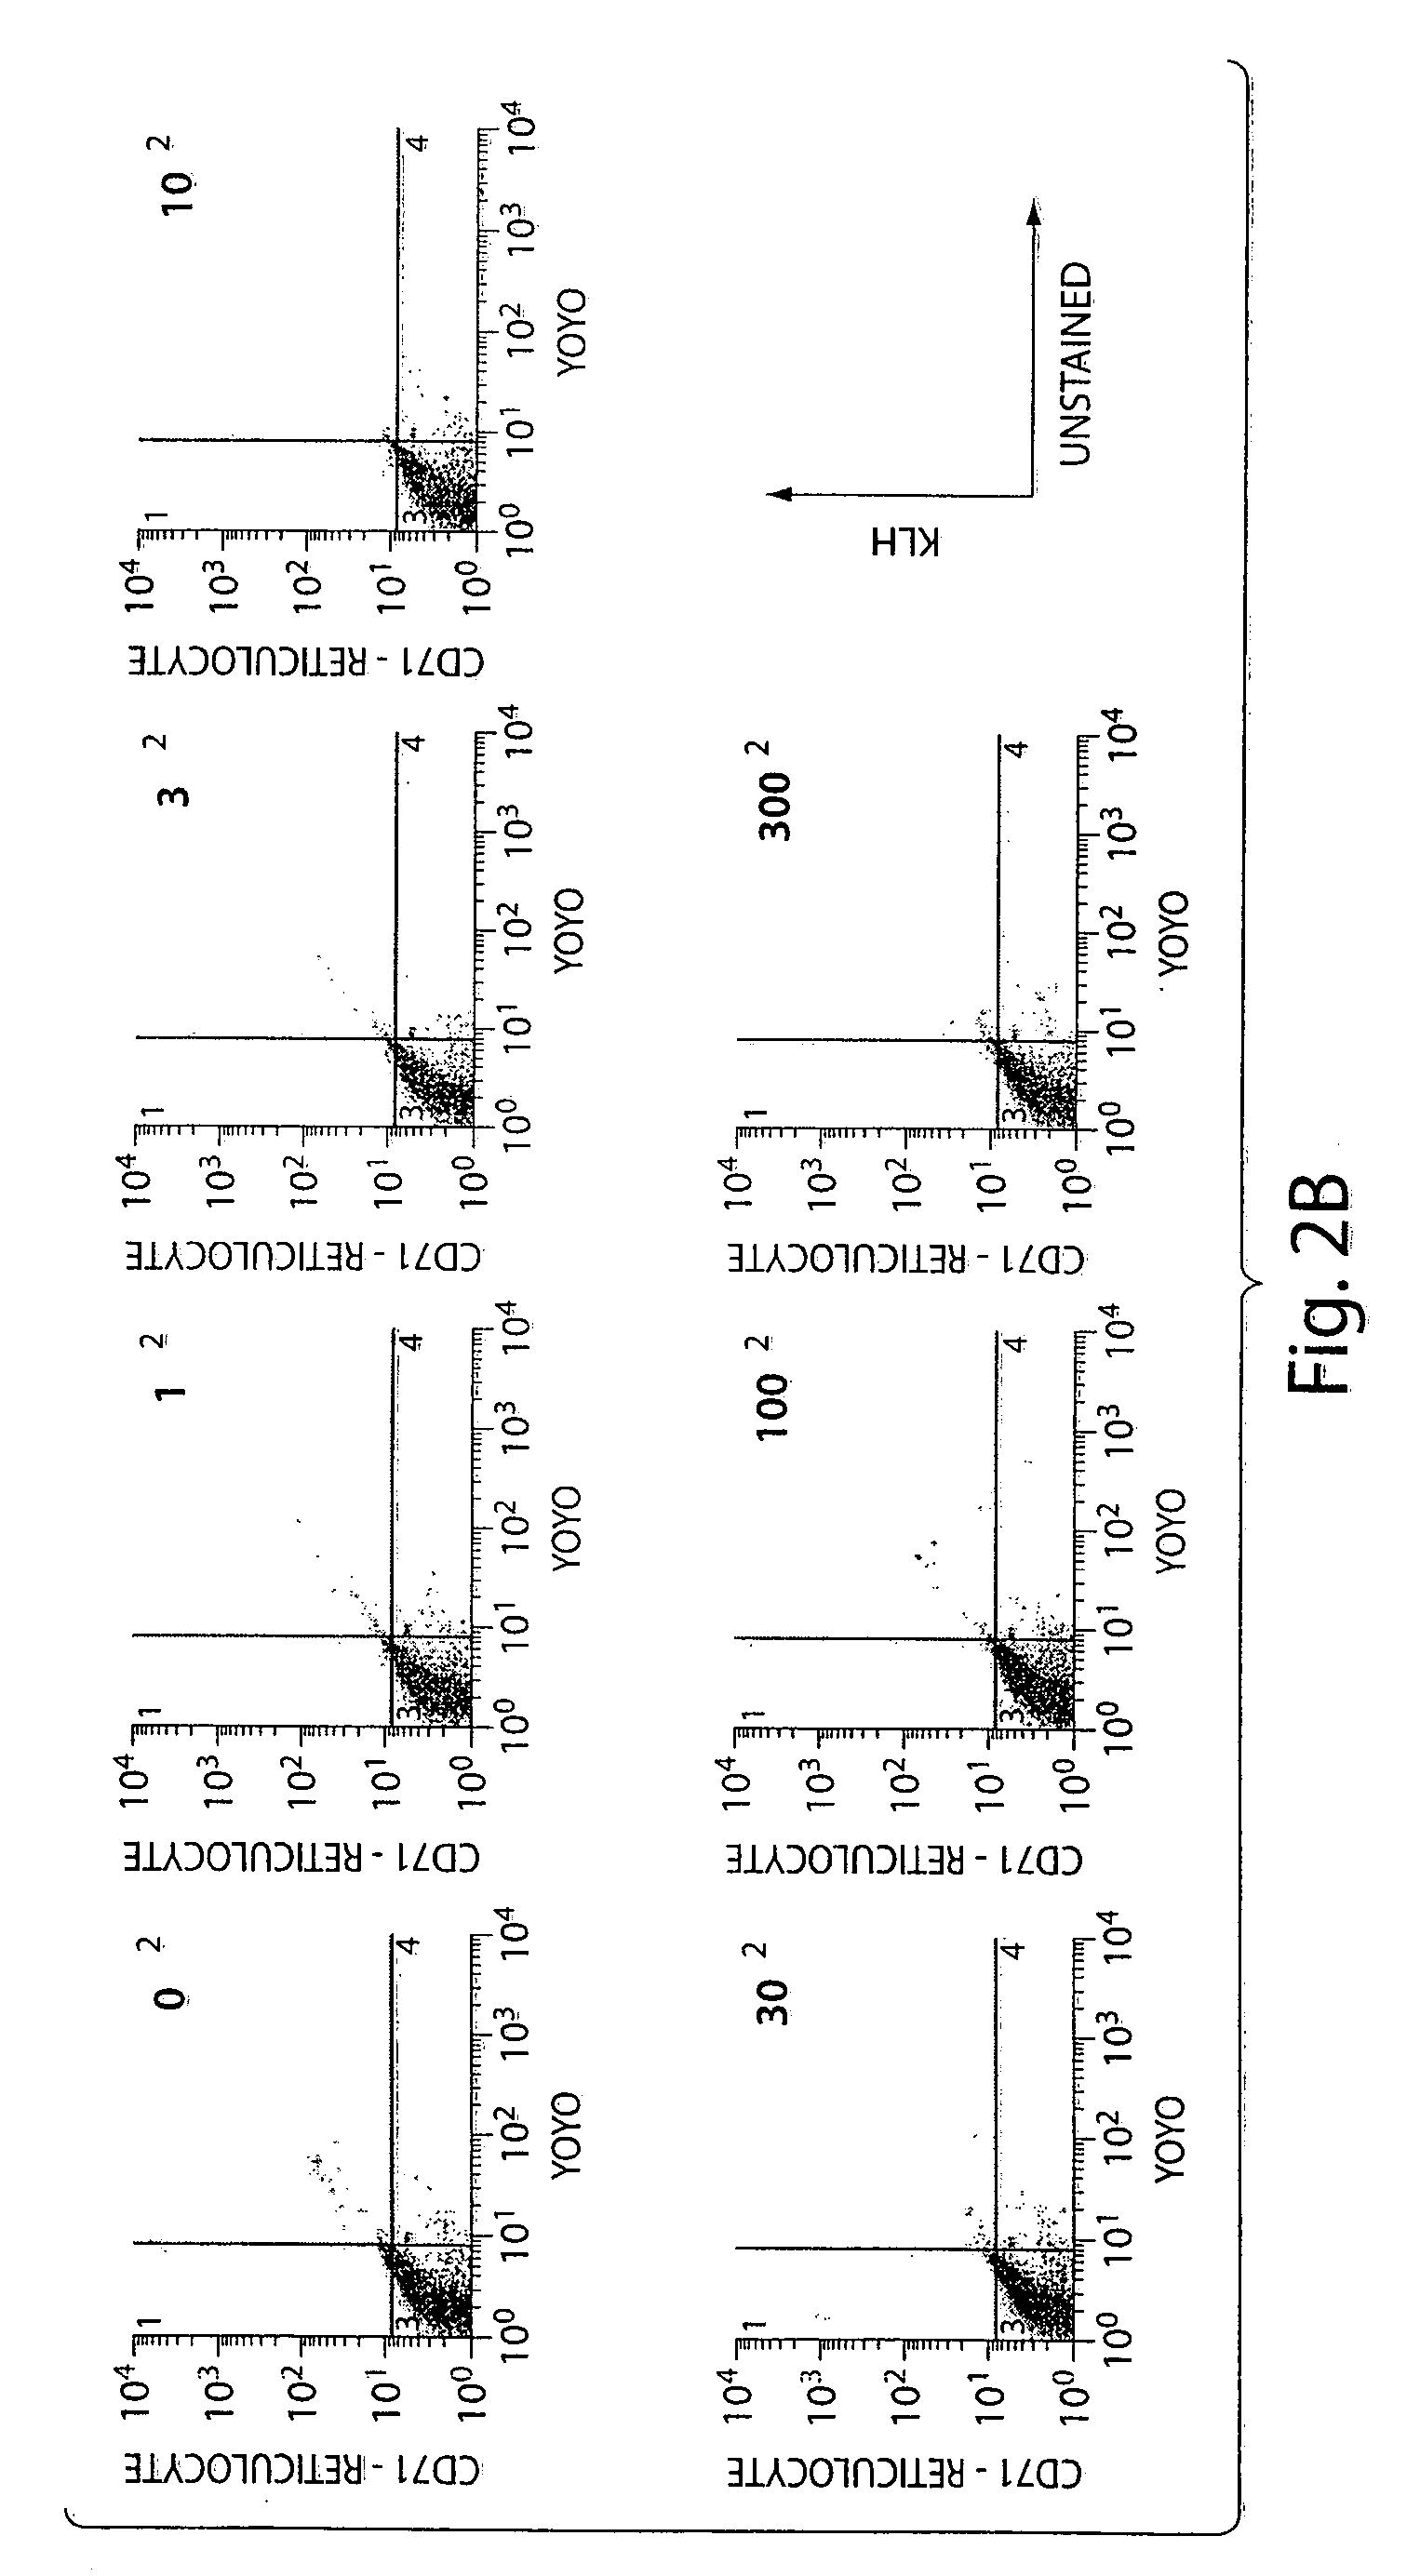 Methods for detection of pathogens in red blood cells